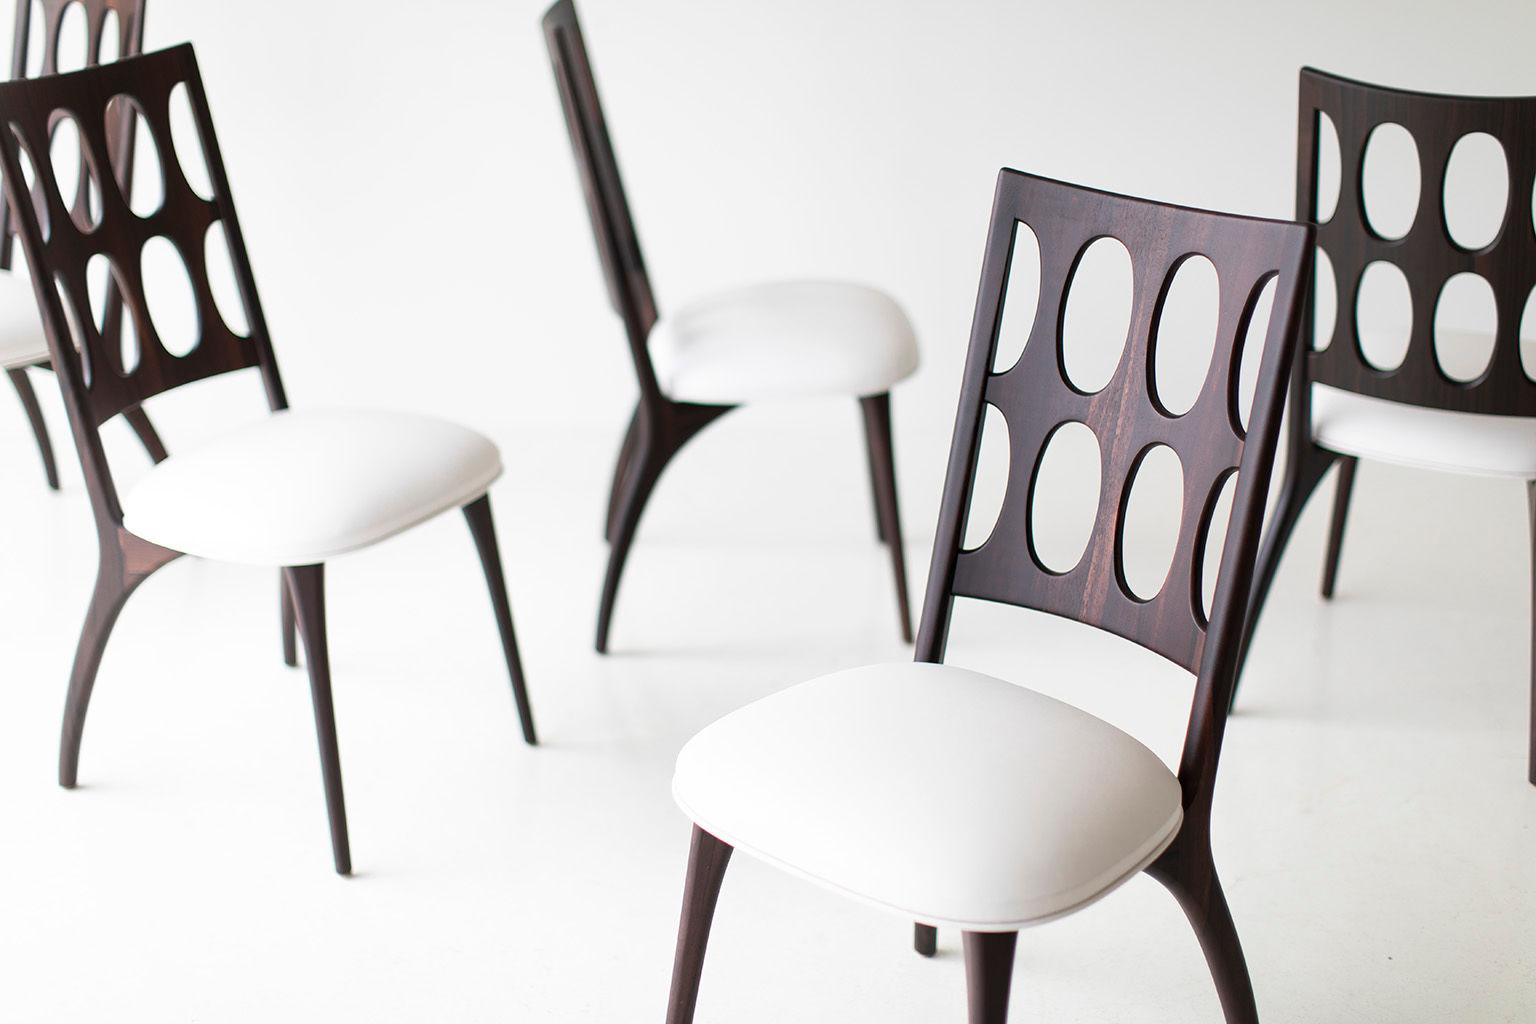 Modern dining chairs, 1901 for Craft Associates Furniture are expertly handcrafted. Each chair base is constructed by hand from hard wood. The chairs shown are in ziricote, and shaped by artisans and finished with a commercial grade matte finish.